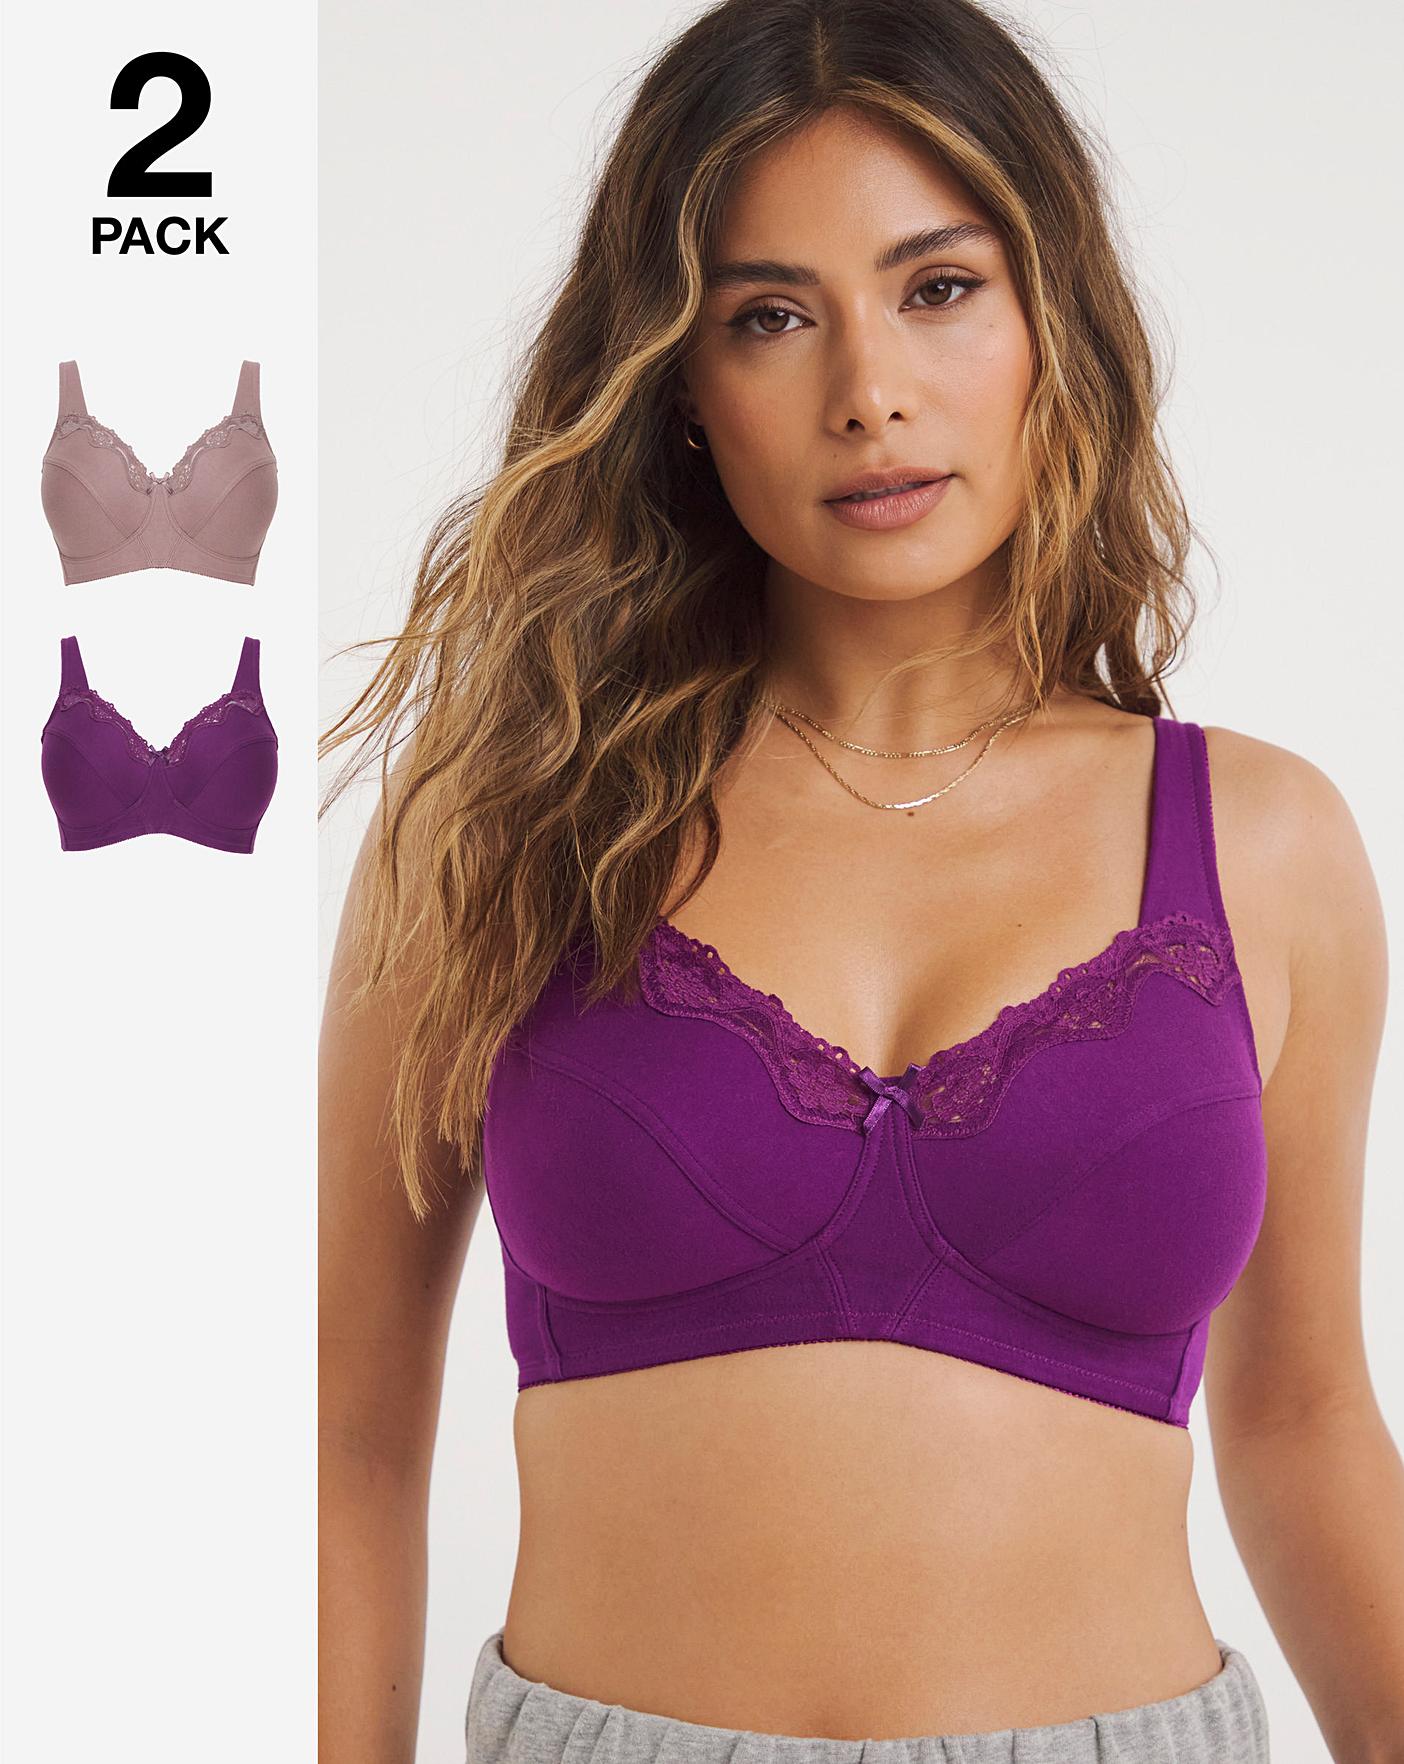 2 Pack Sarah Non Wired Bras Mink/Grape